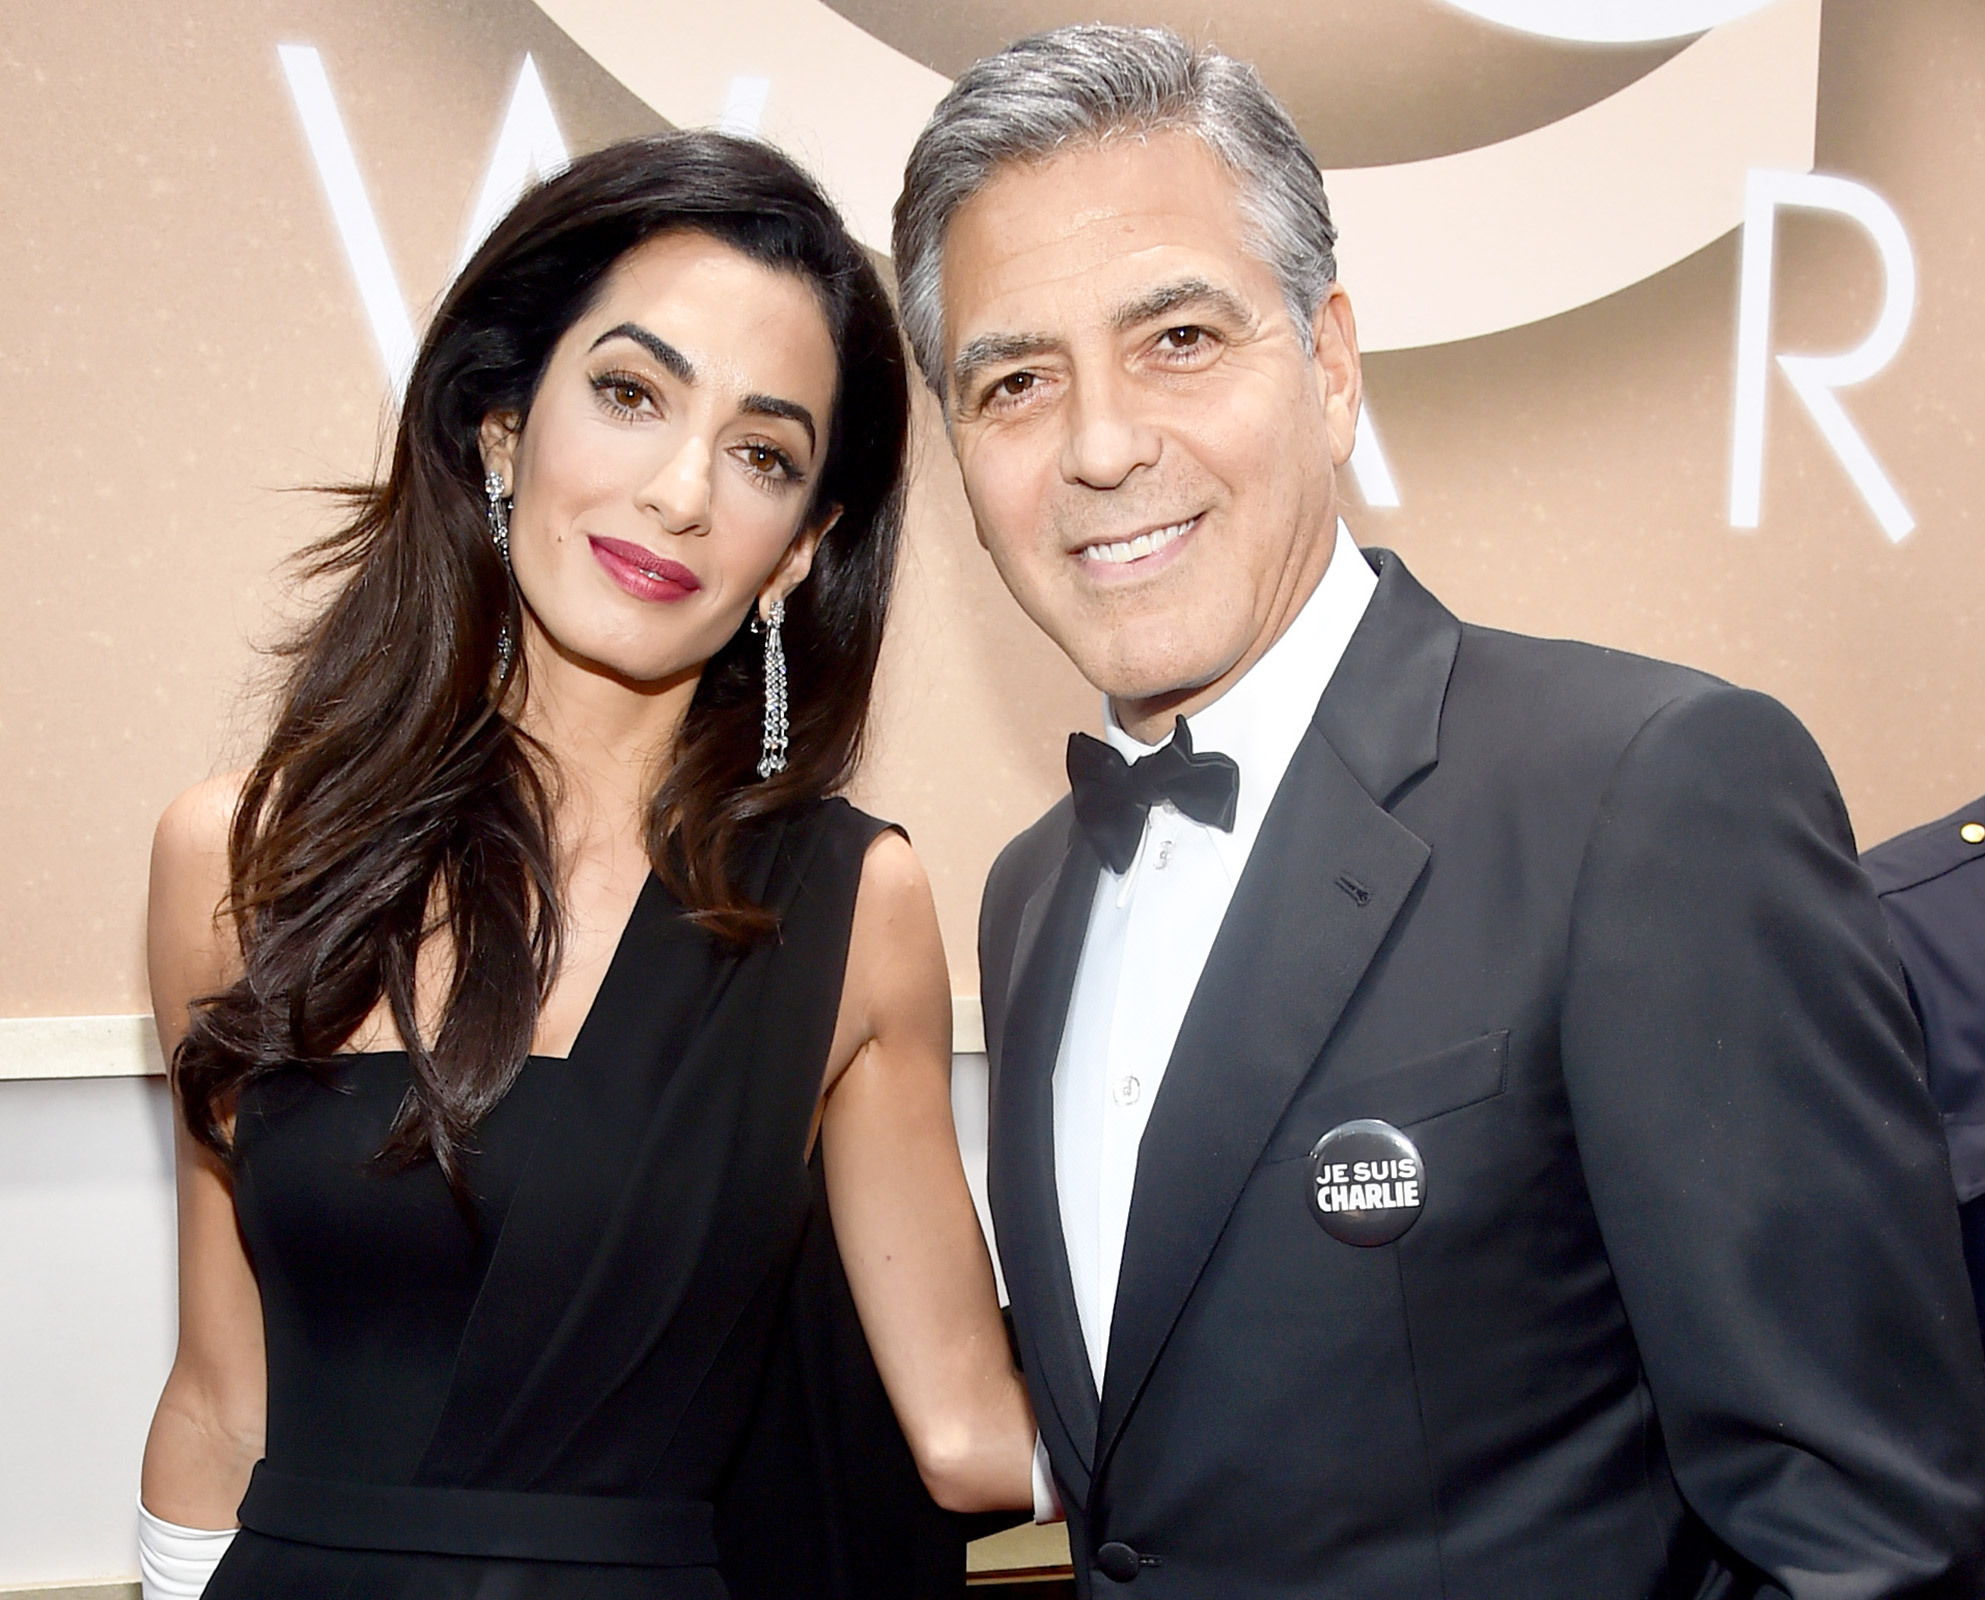  George and Amal Clooney